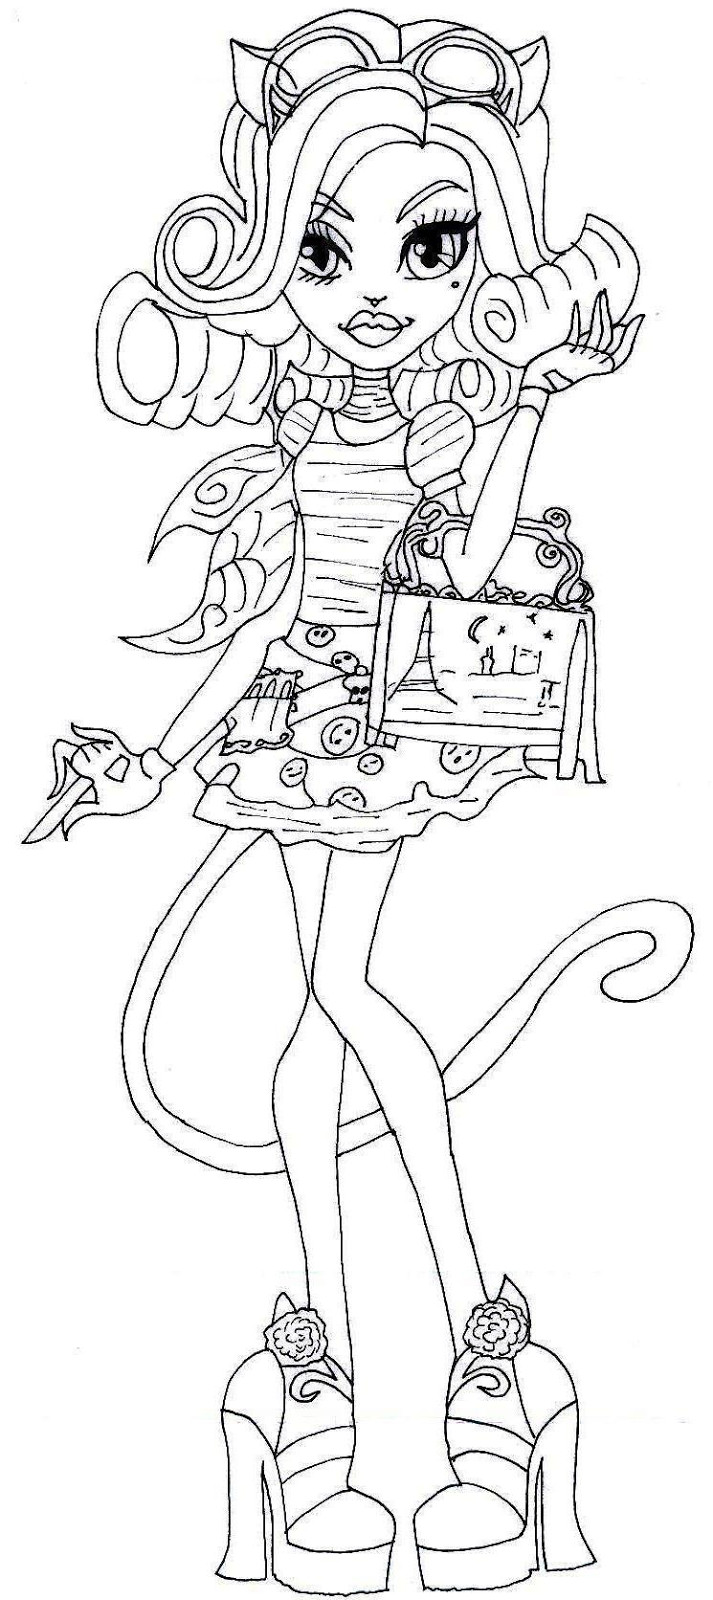 Free Printable Monster High Coloring Pages
 Free Printable Monster High Coloring Pages Free Printable